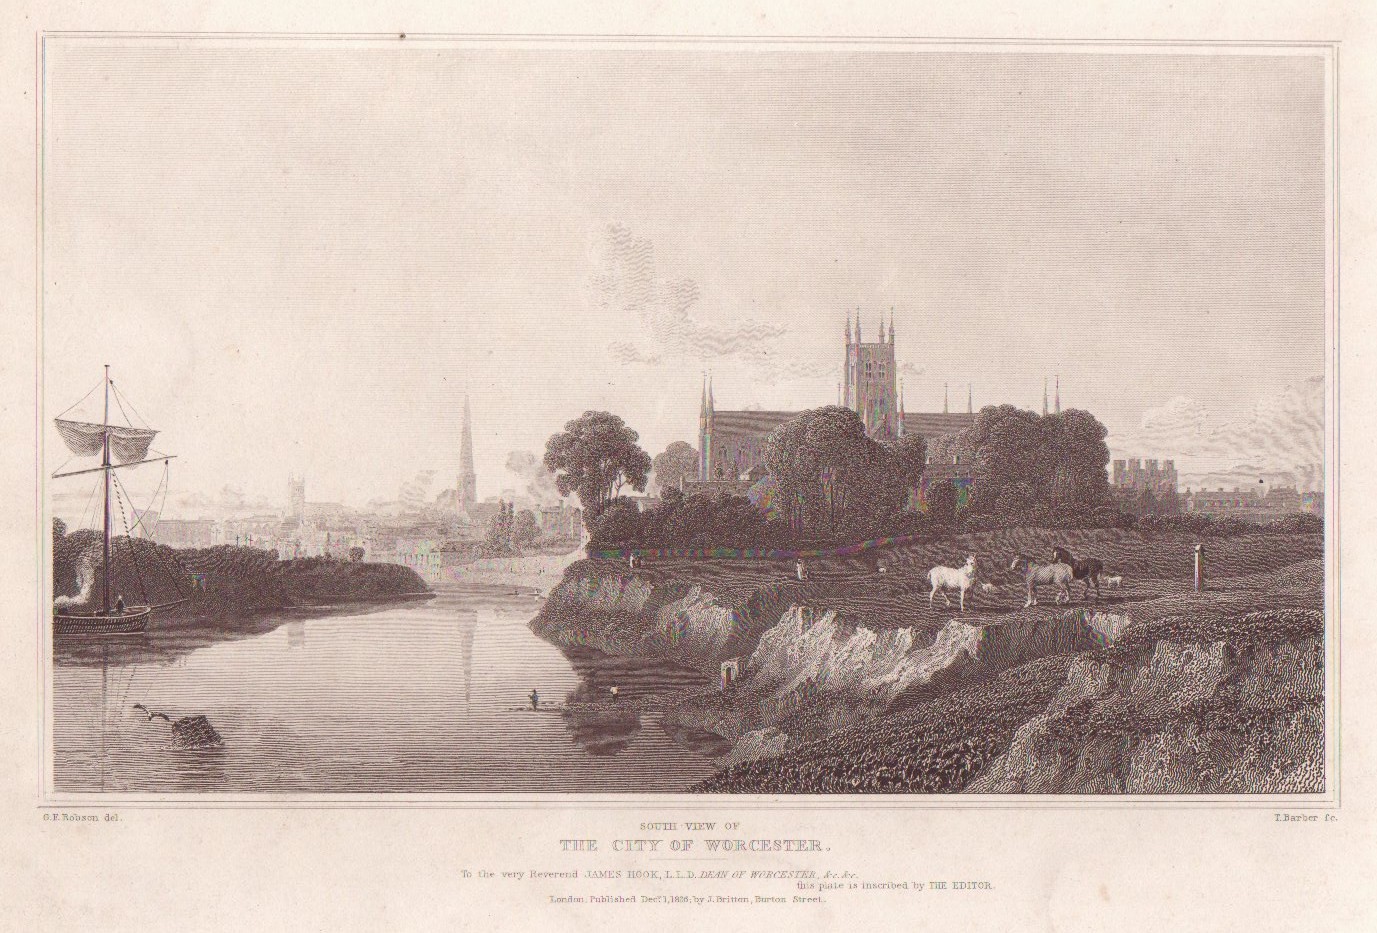 Print - South View of the City of Worcester. - Barber